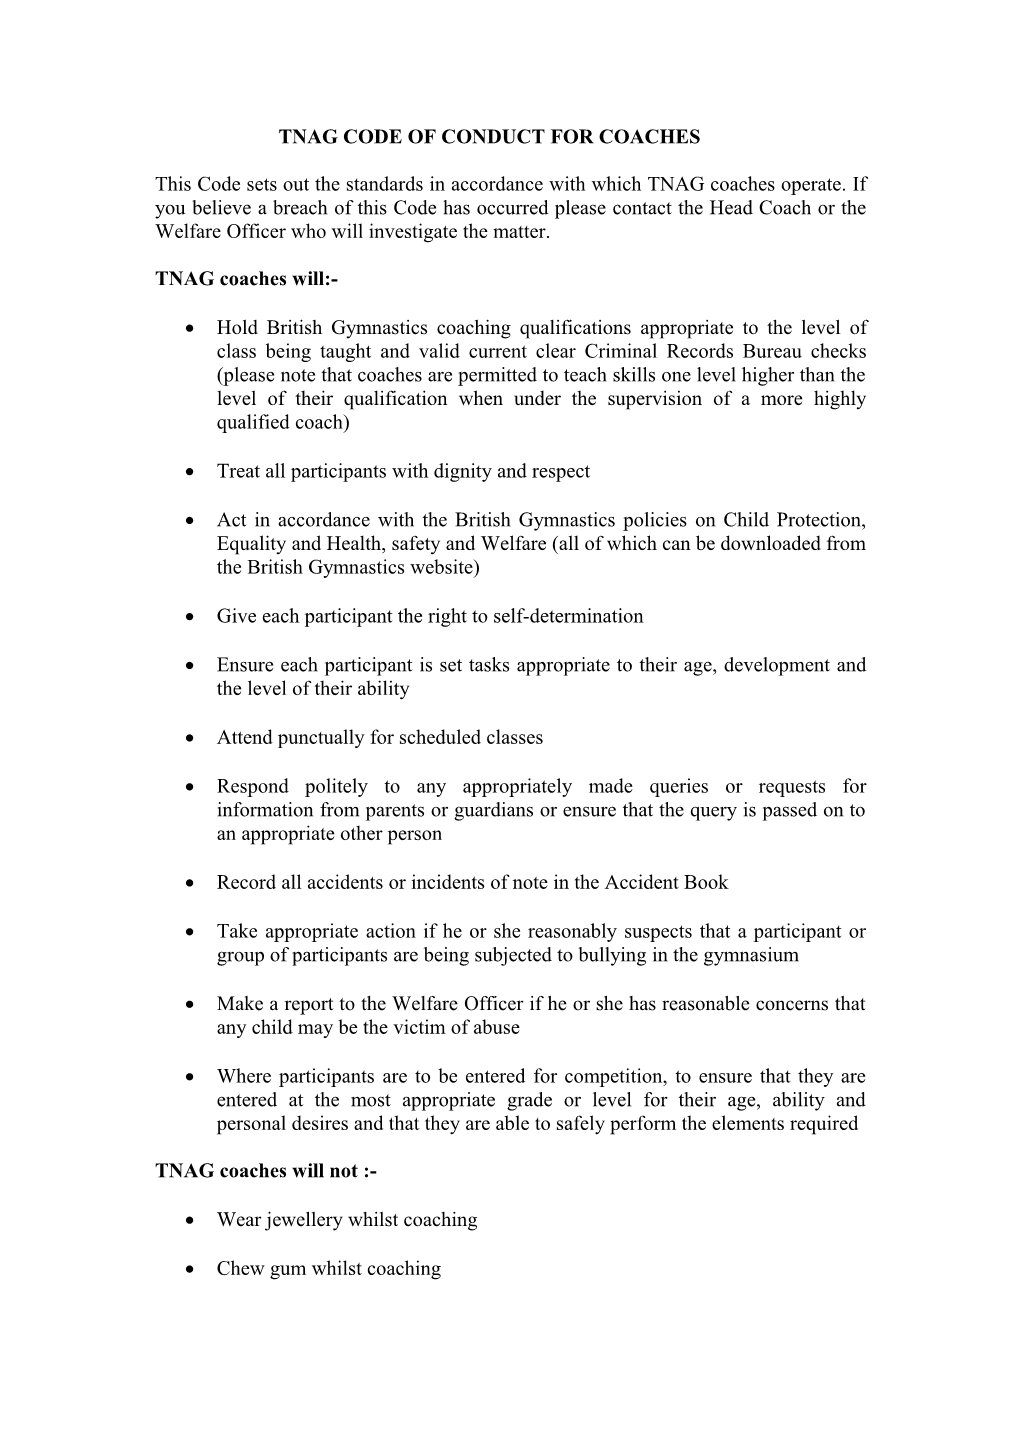 Tnag Code of Conduct for Coaches